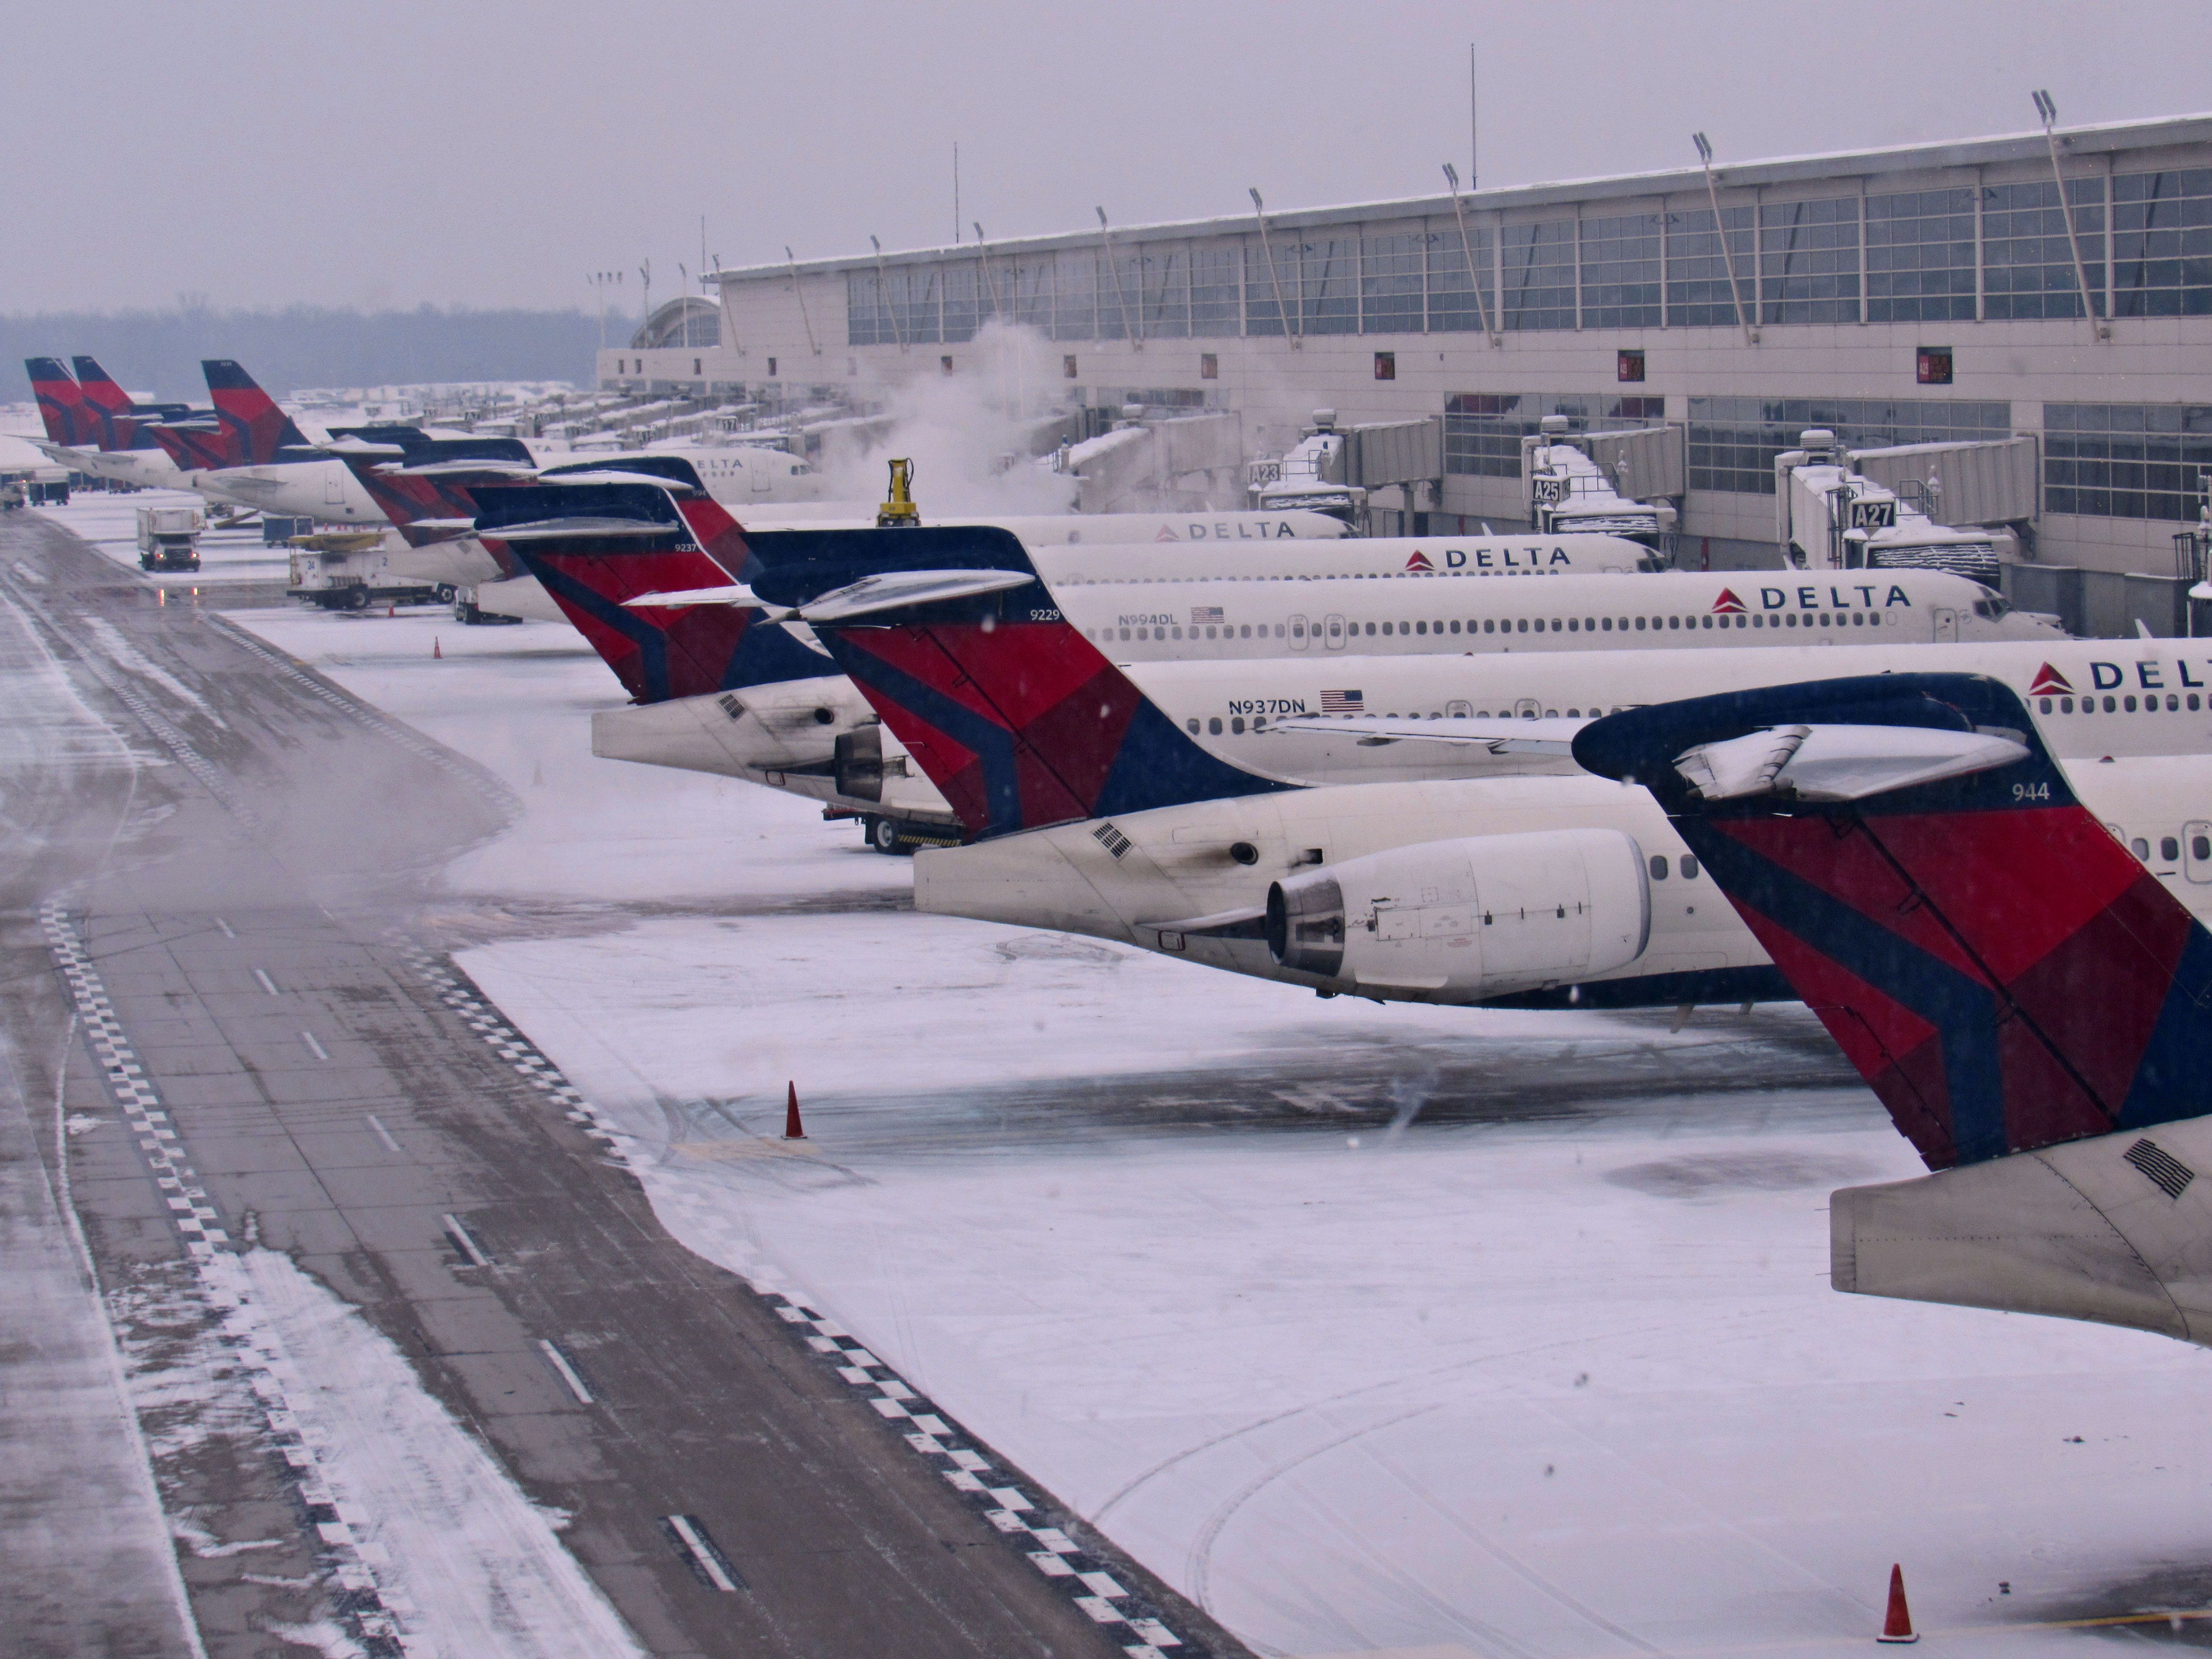 A line-up of Delta Air Lines aircraft in the snow